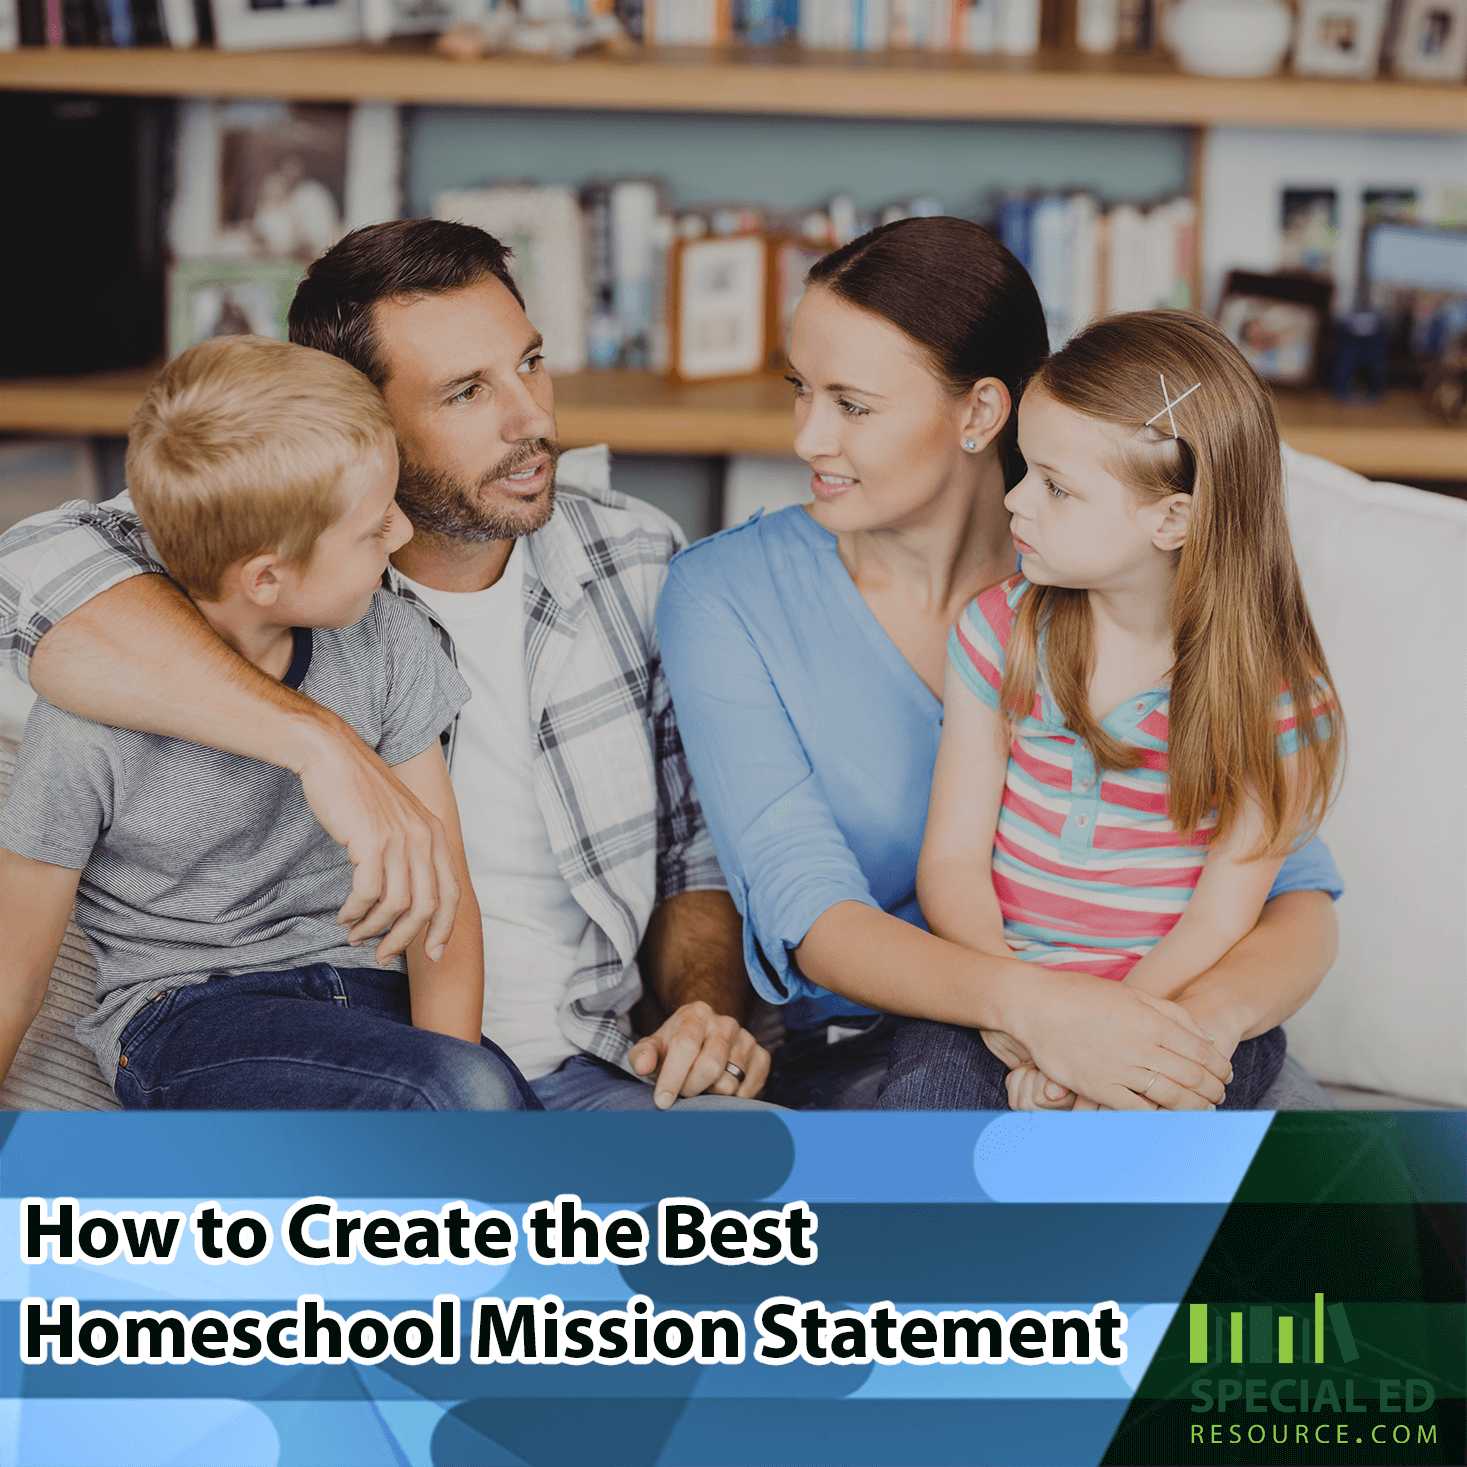 Family sitting on the couch together discussing their homeschool mission statement.